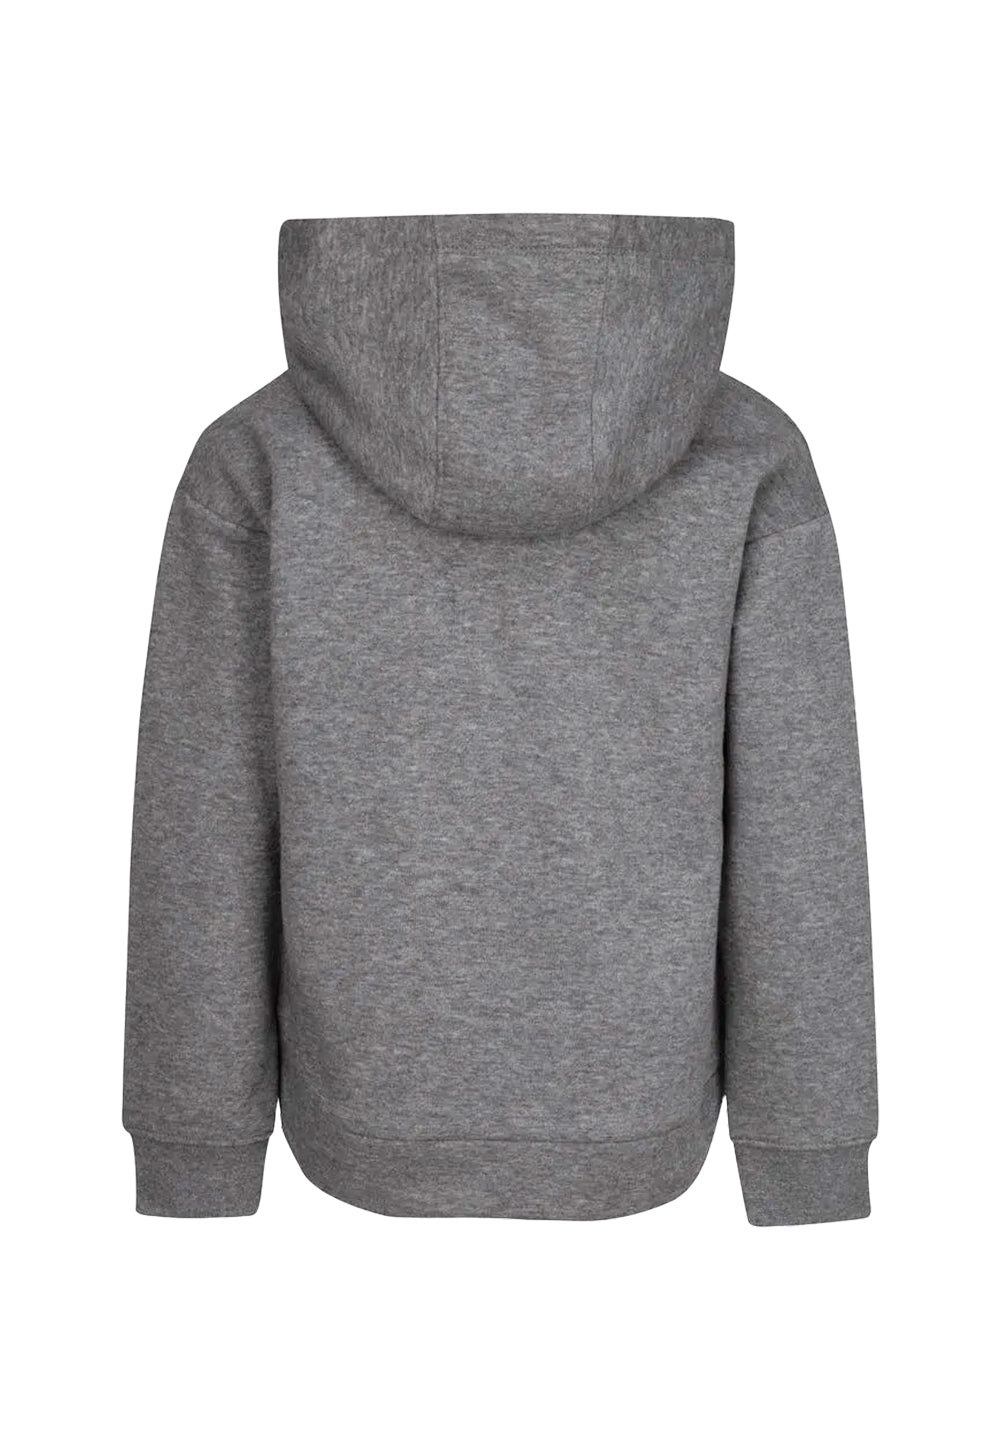 Gray hoodie for girls